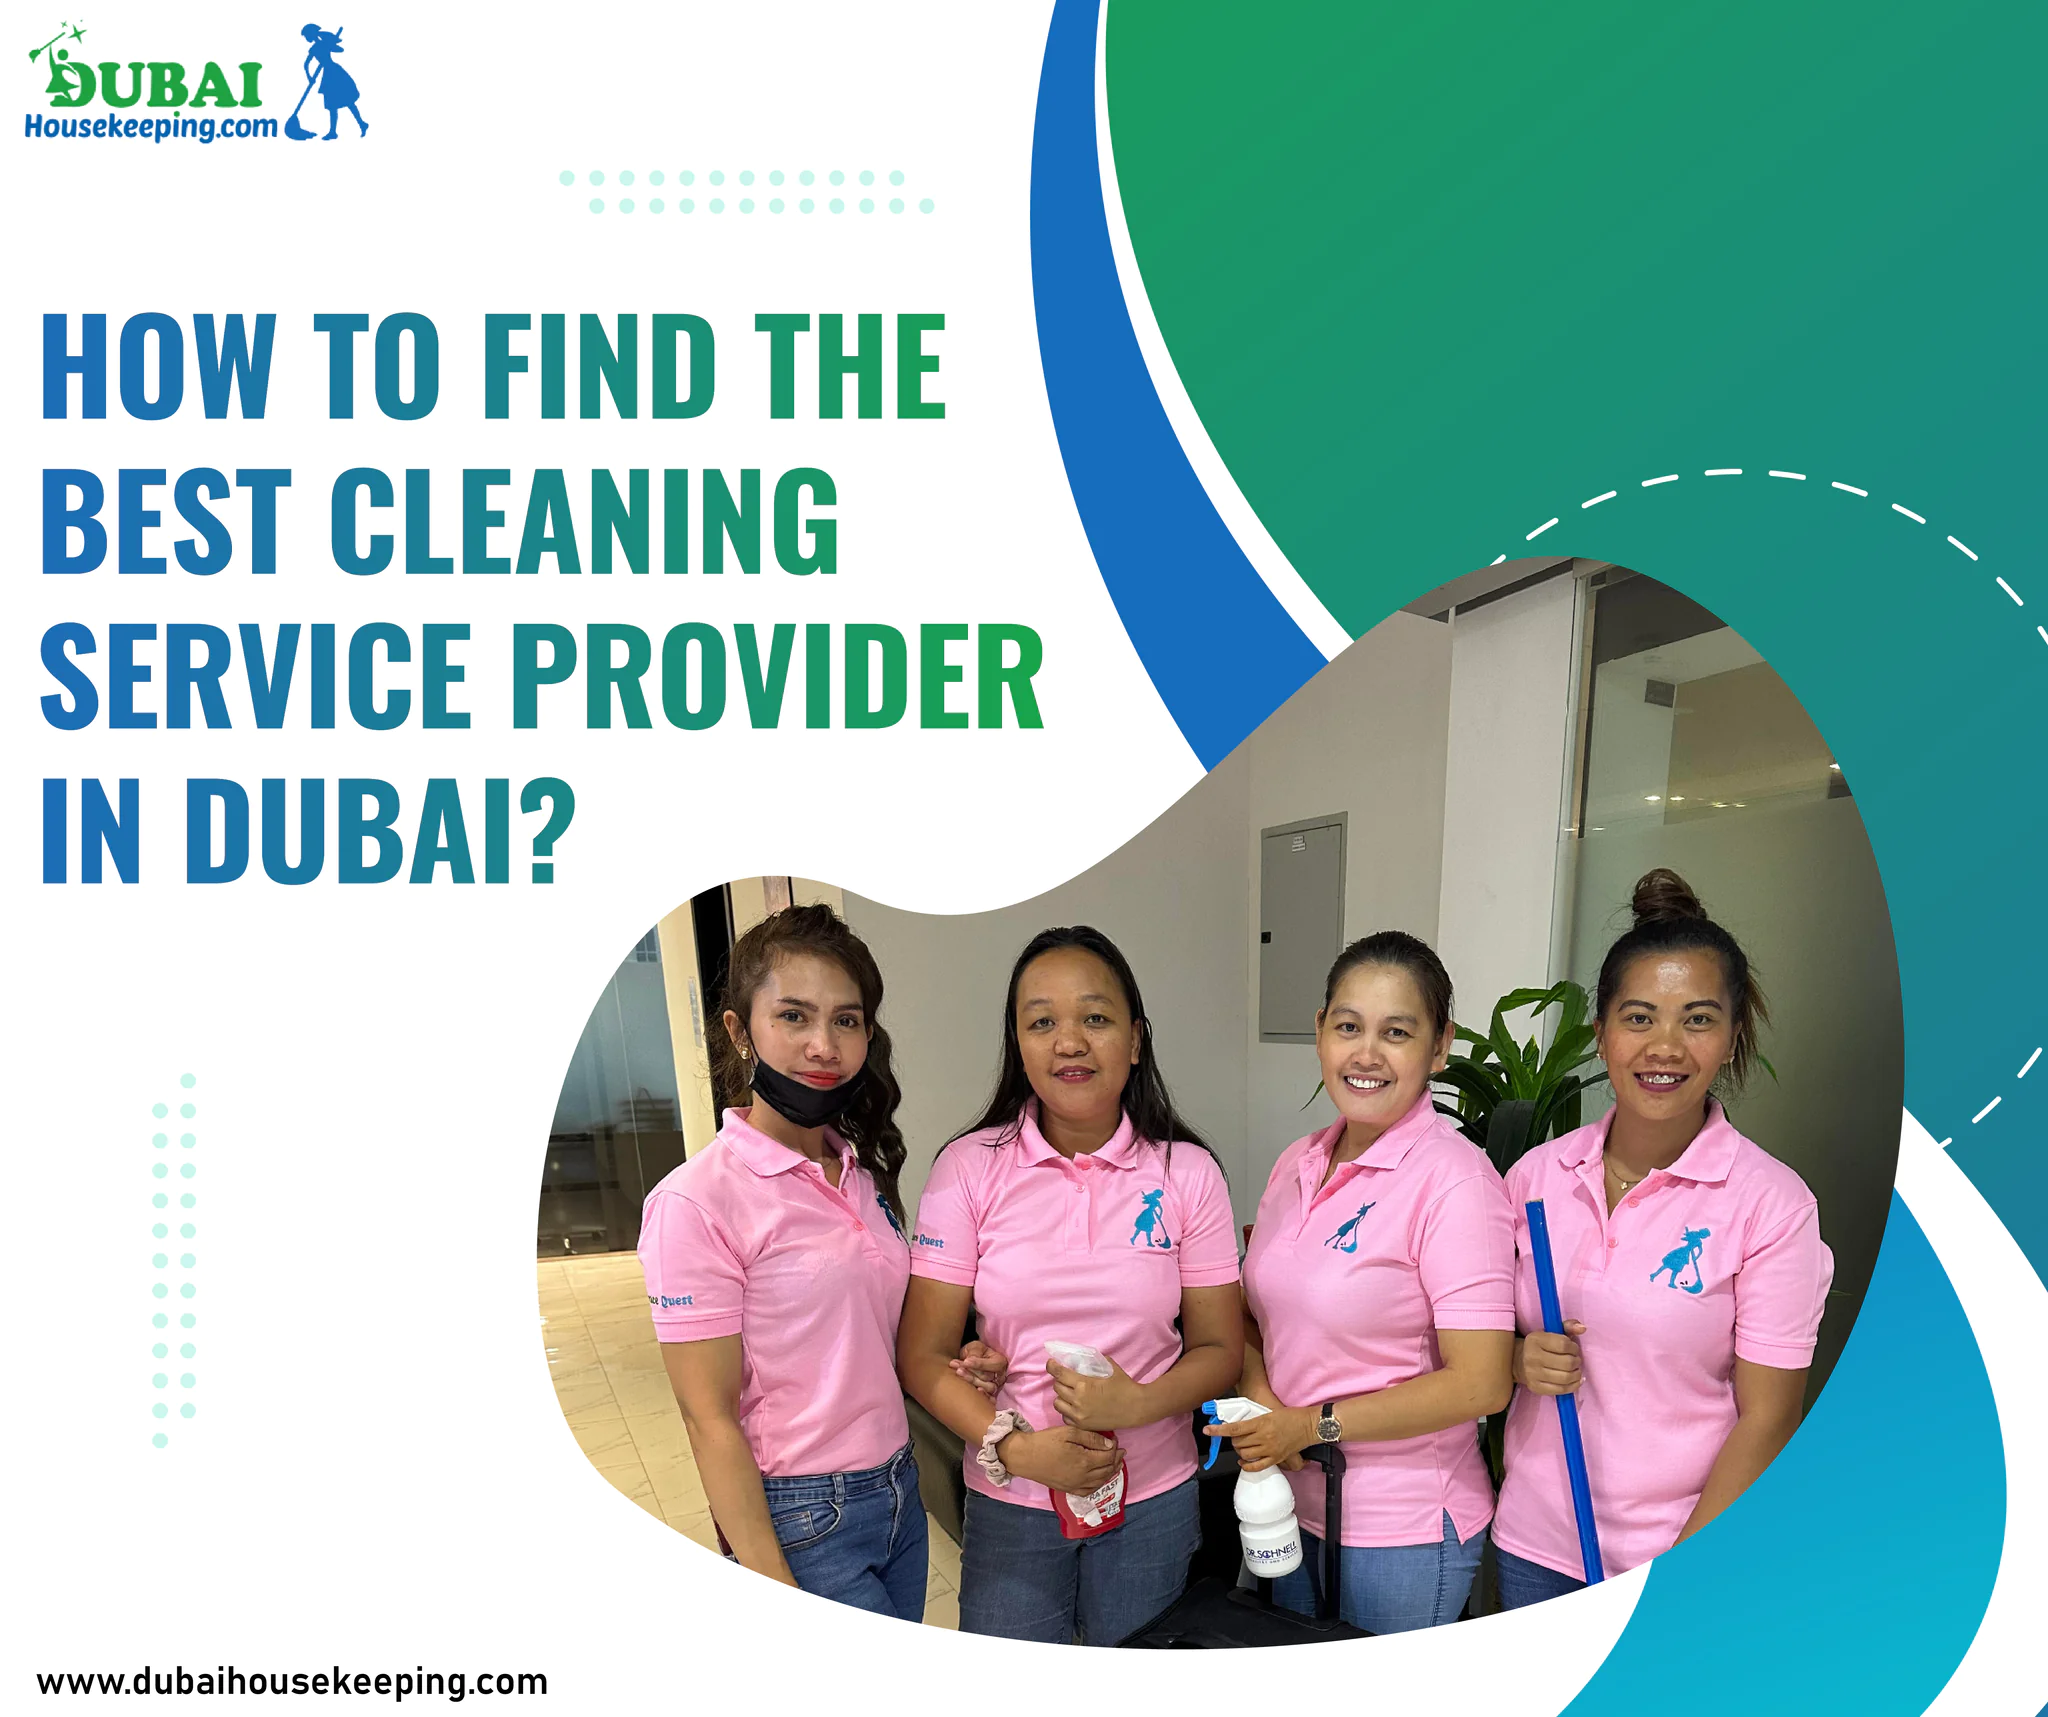 How to Find the Best Cleaning Service Provider in Dubai?